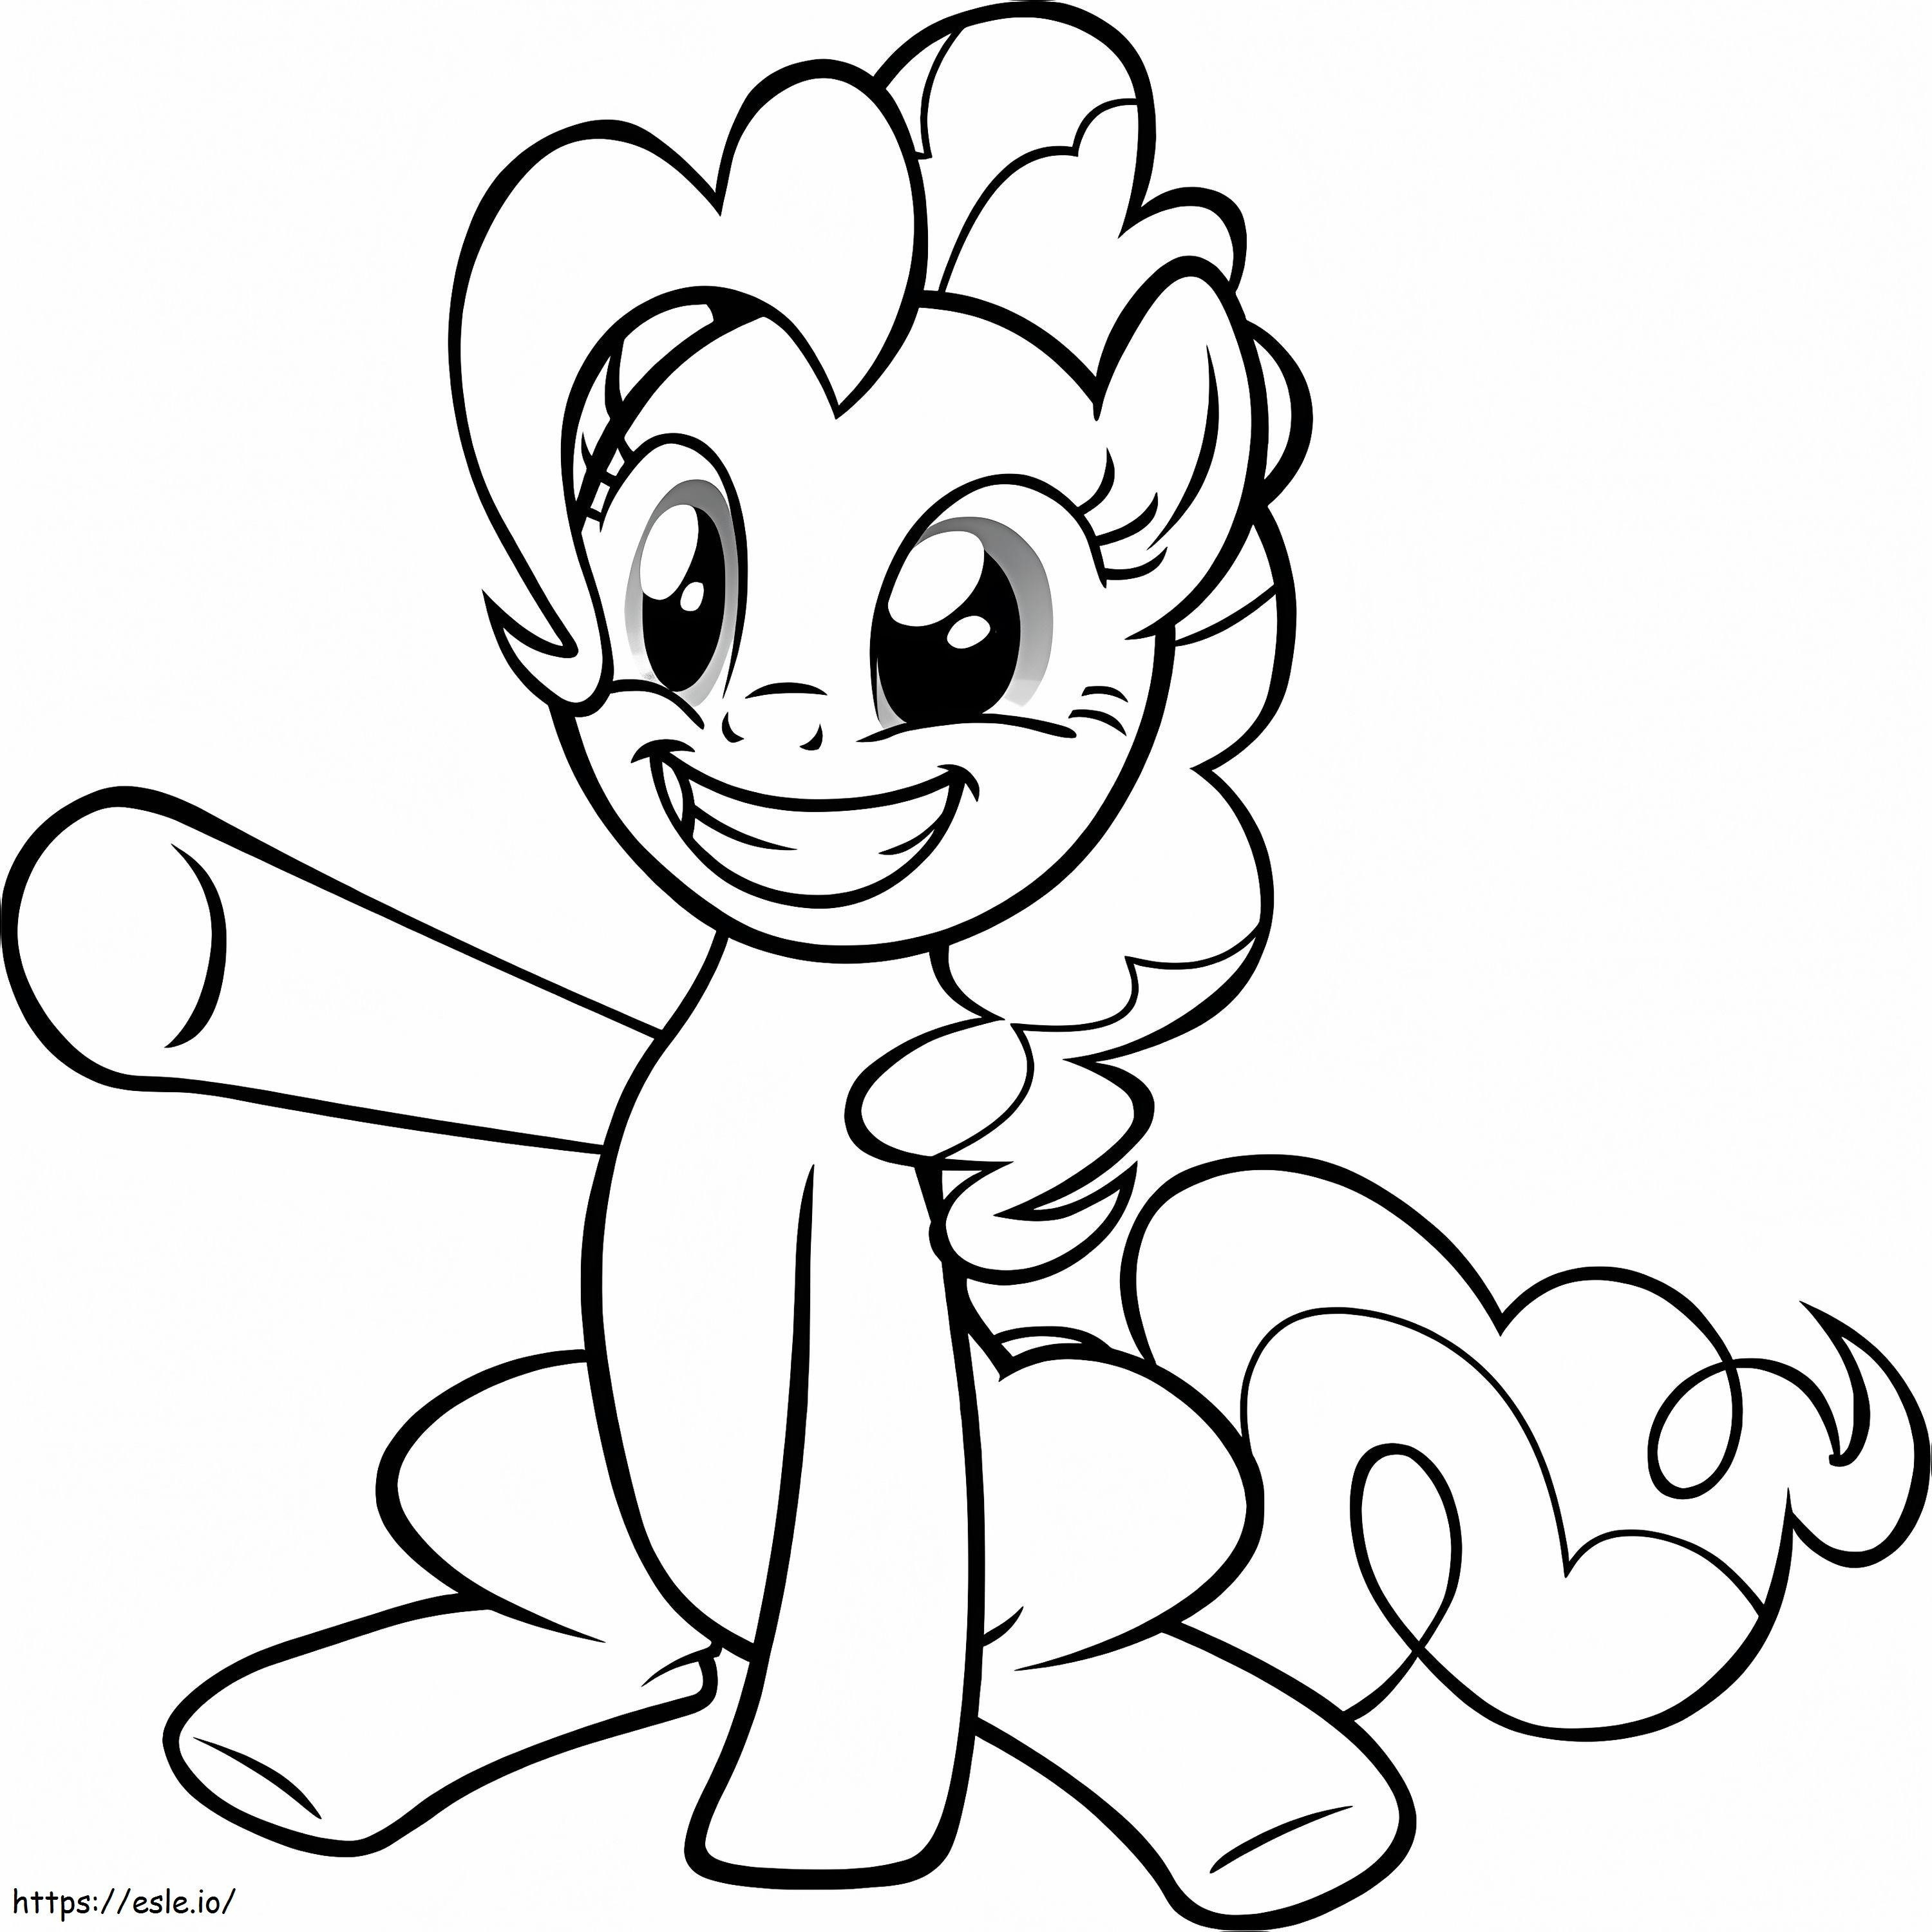 Funny Pinkie Pie coloring page